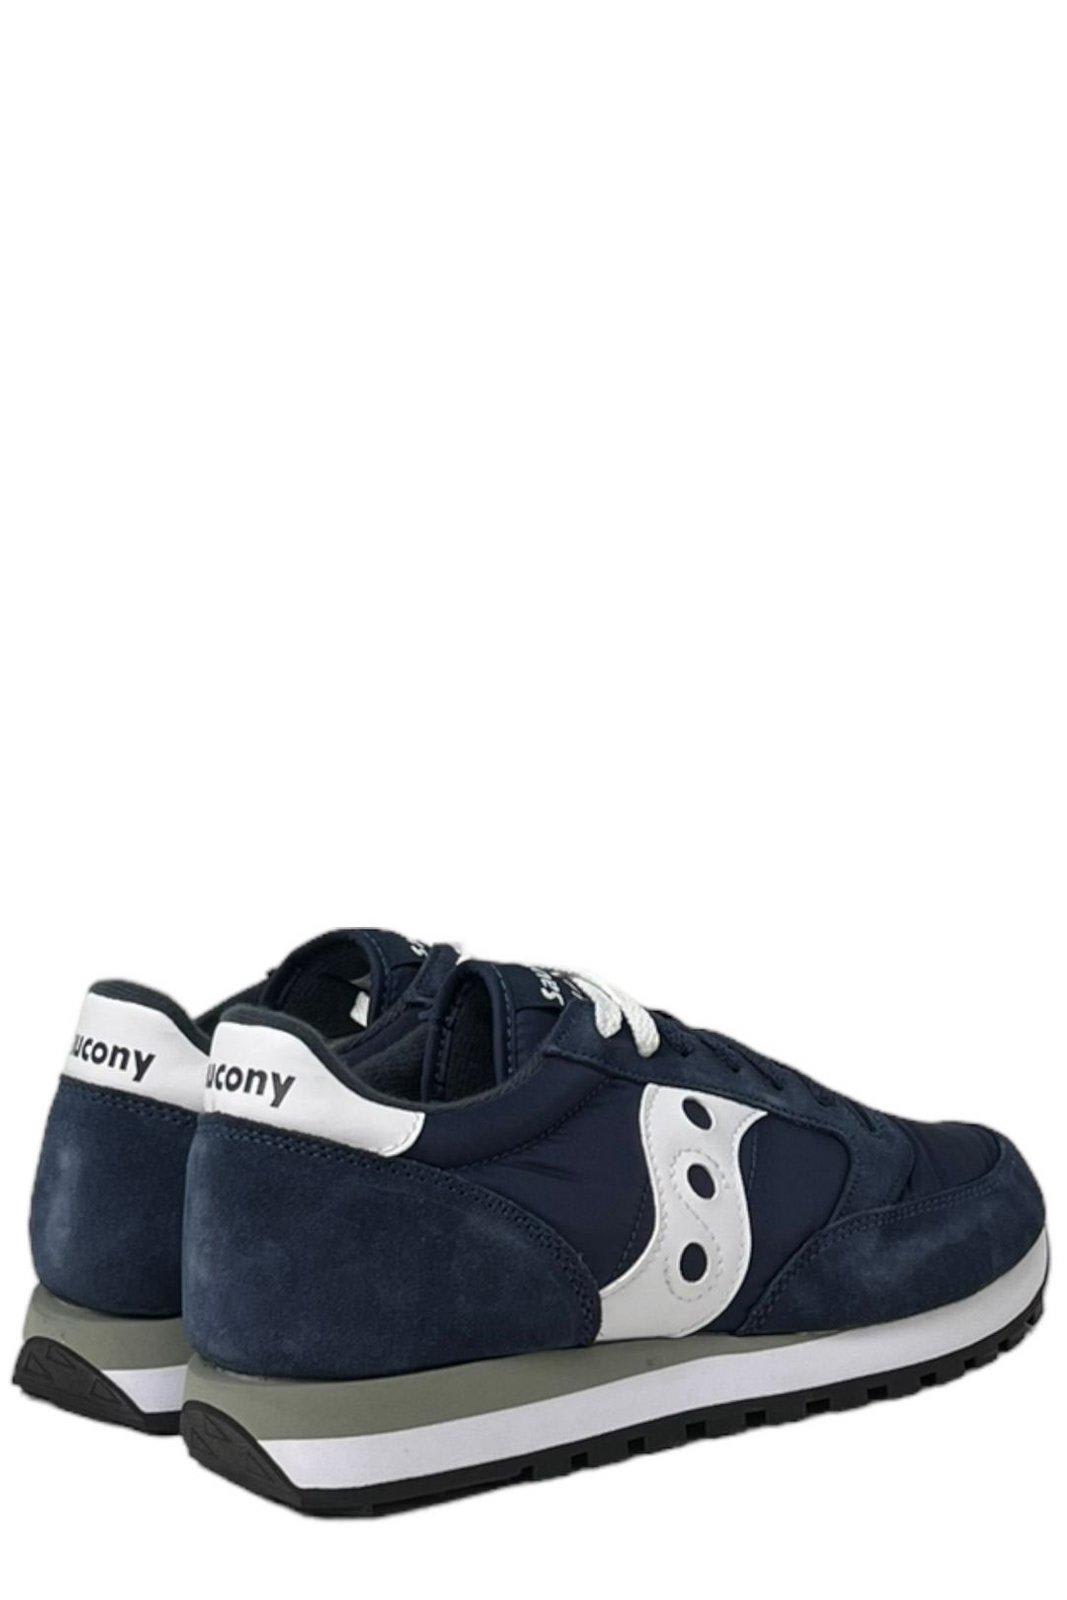 Shop Saucony Jazz Original Lace-up Sneakers In Navy/white